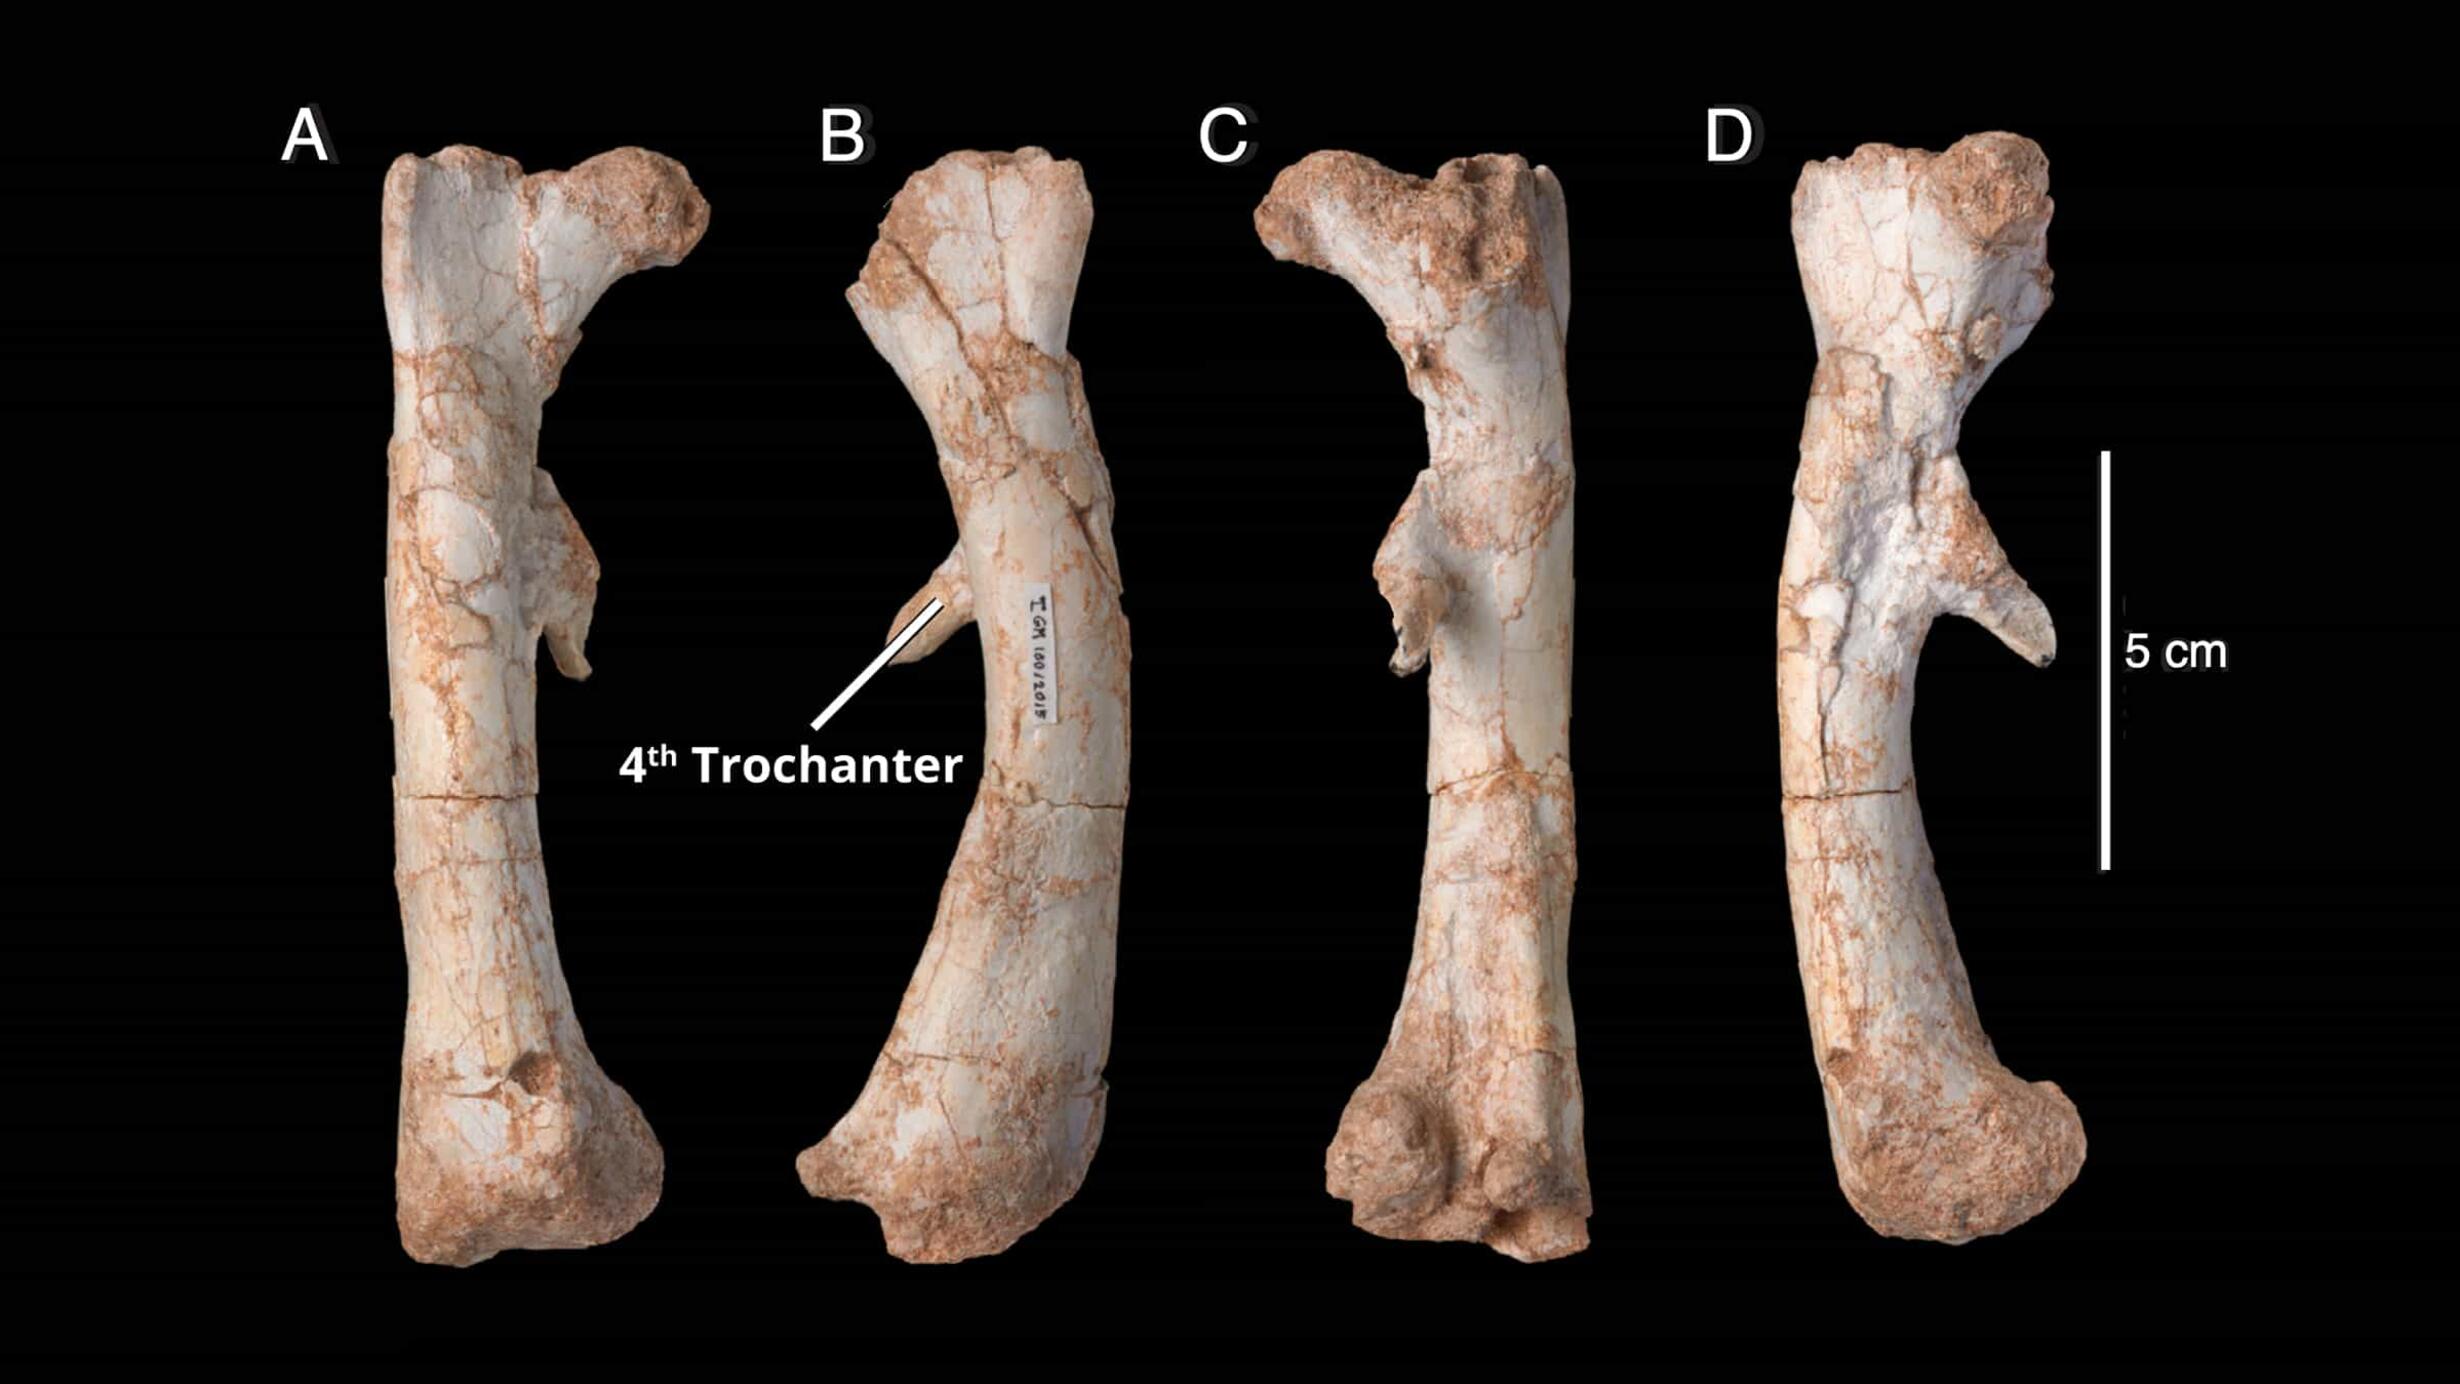 Four angles of the same femur bone. There is a scale bar next to the bone indicating it is about 13 cm long. 